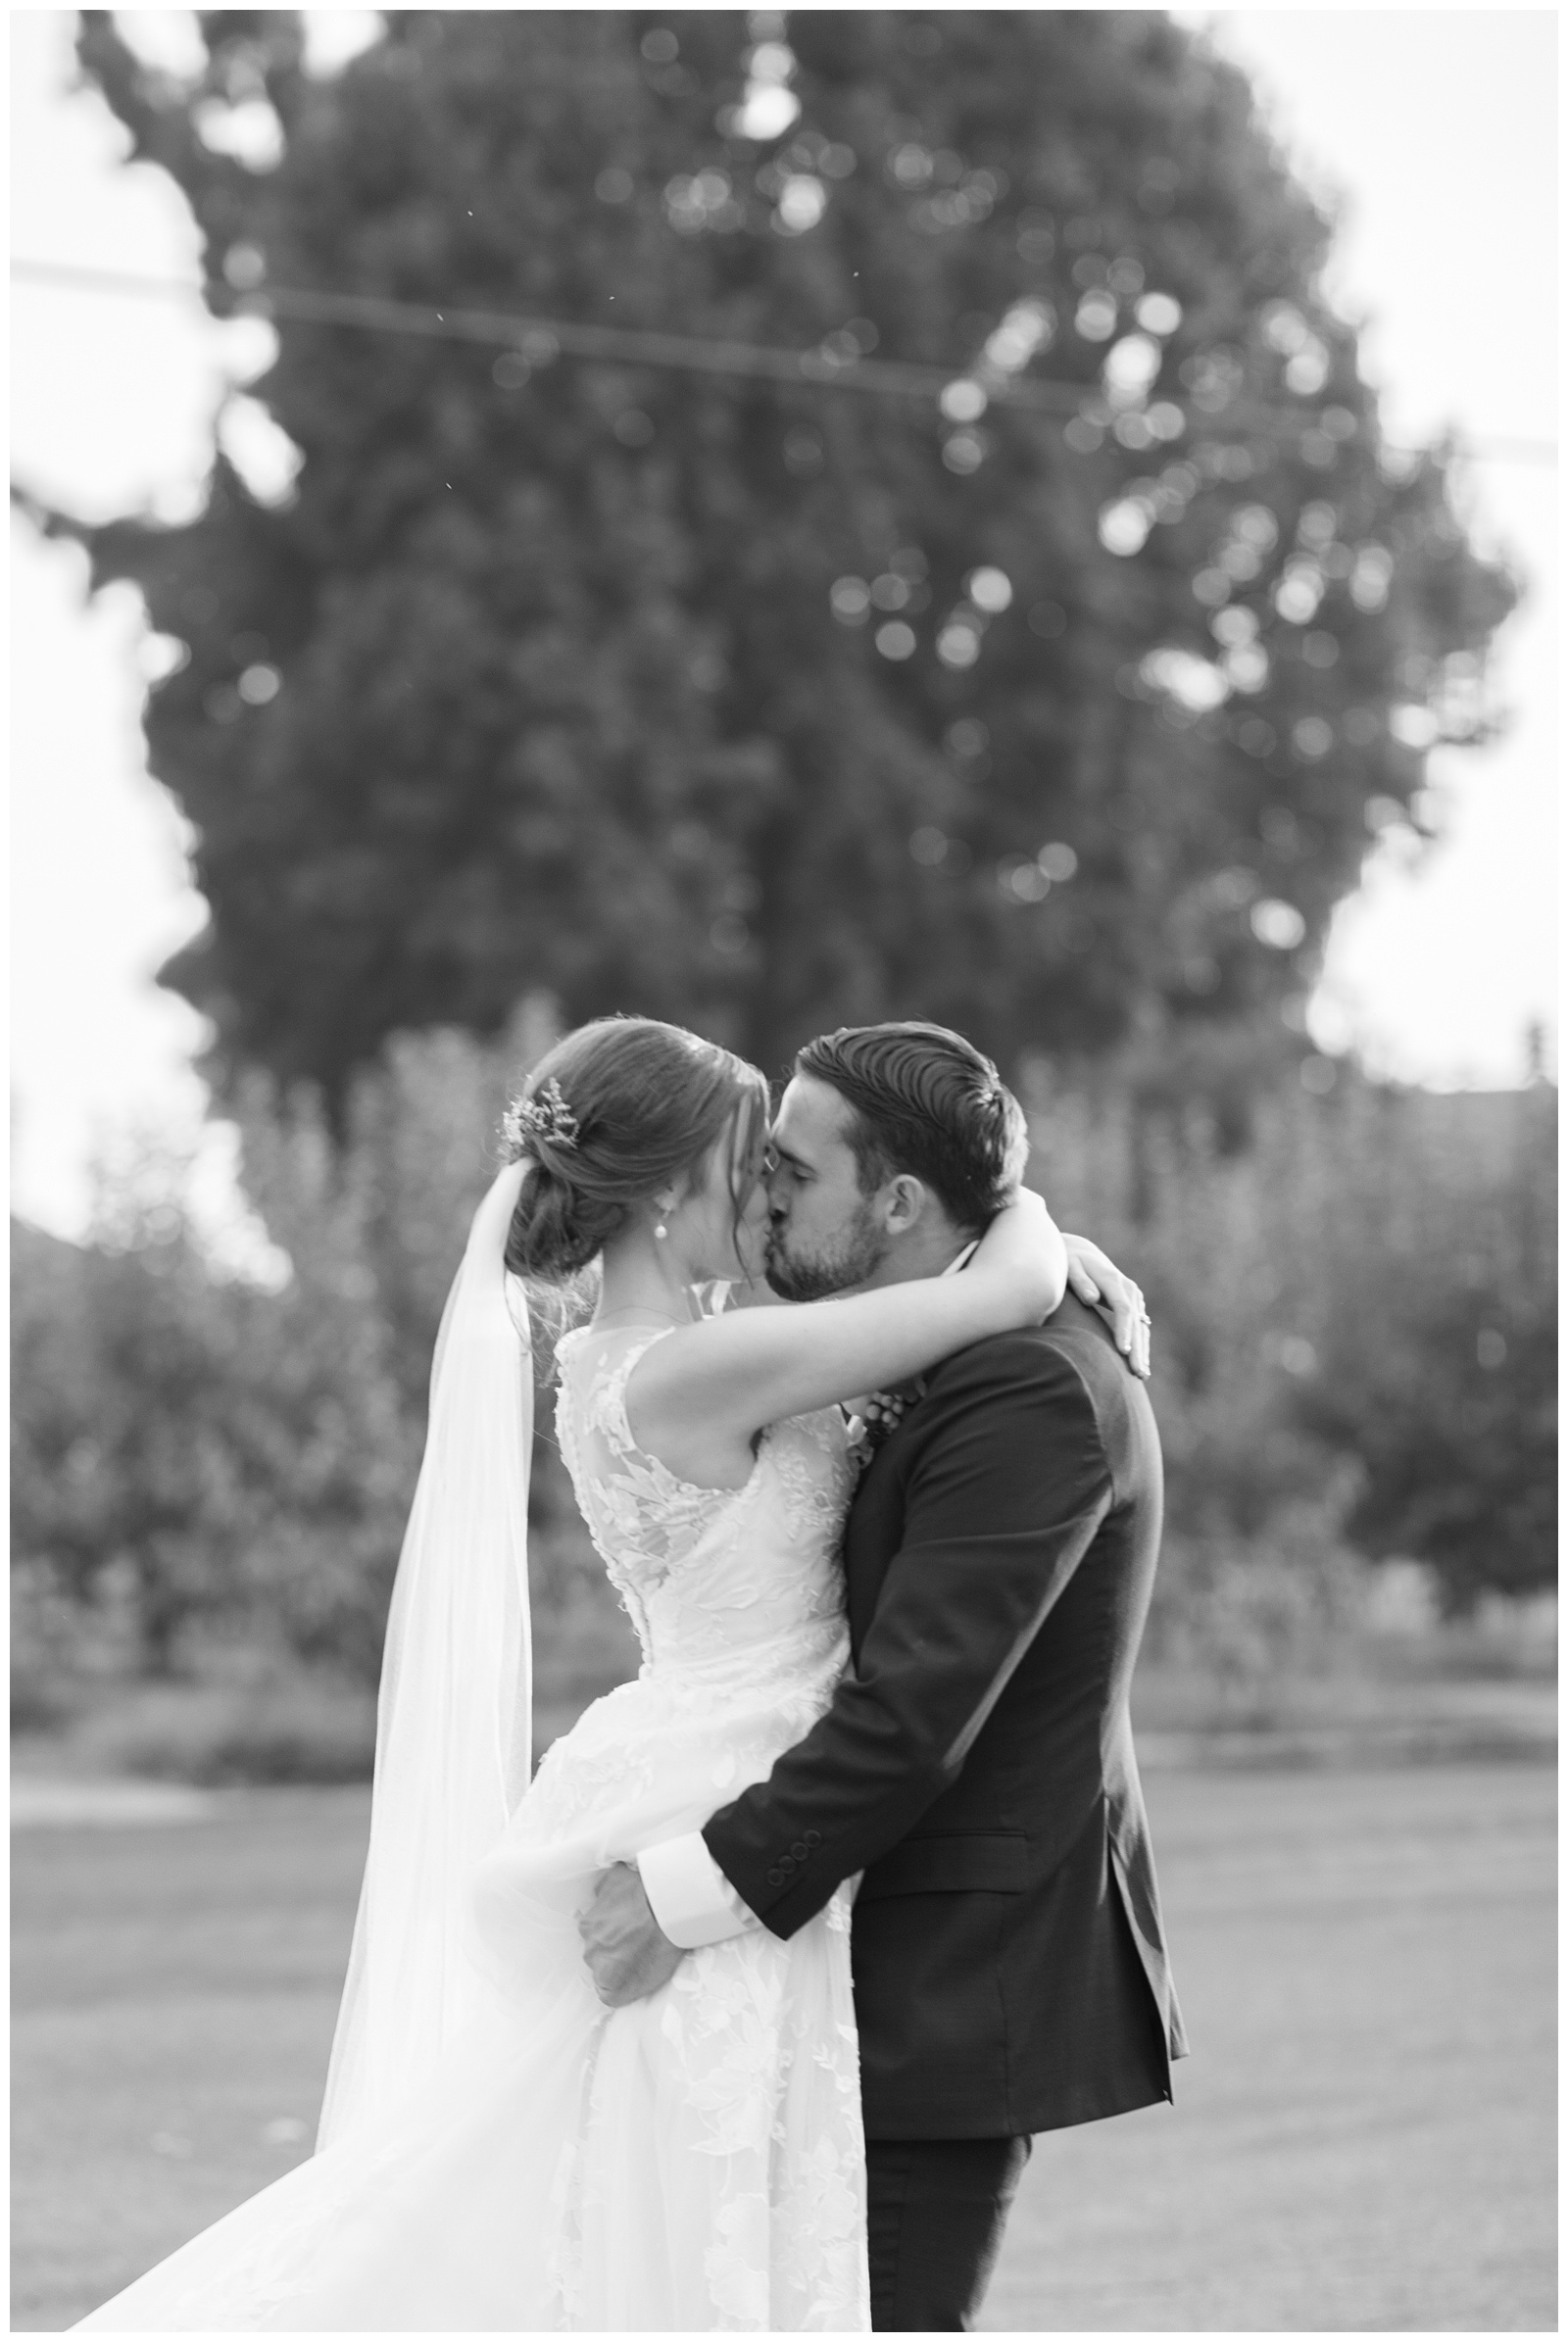 groom picking bride up and kissing her black and white image